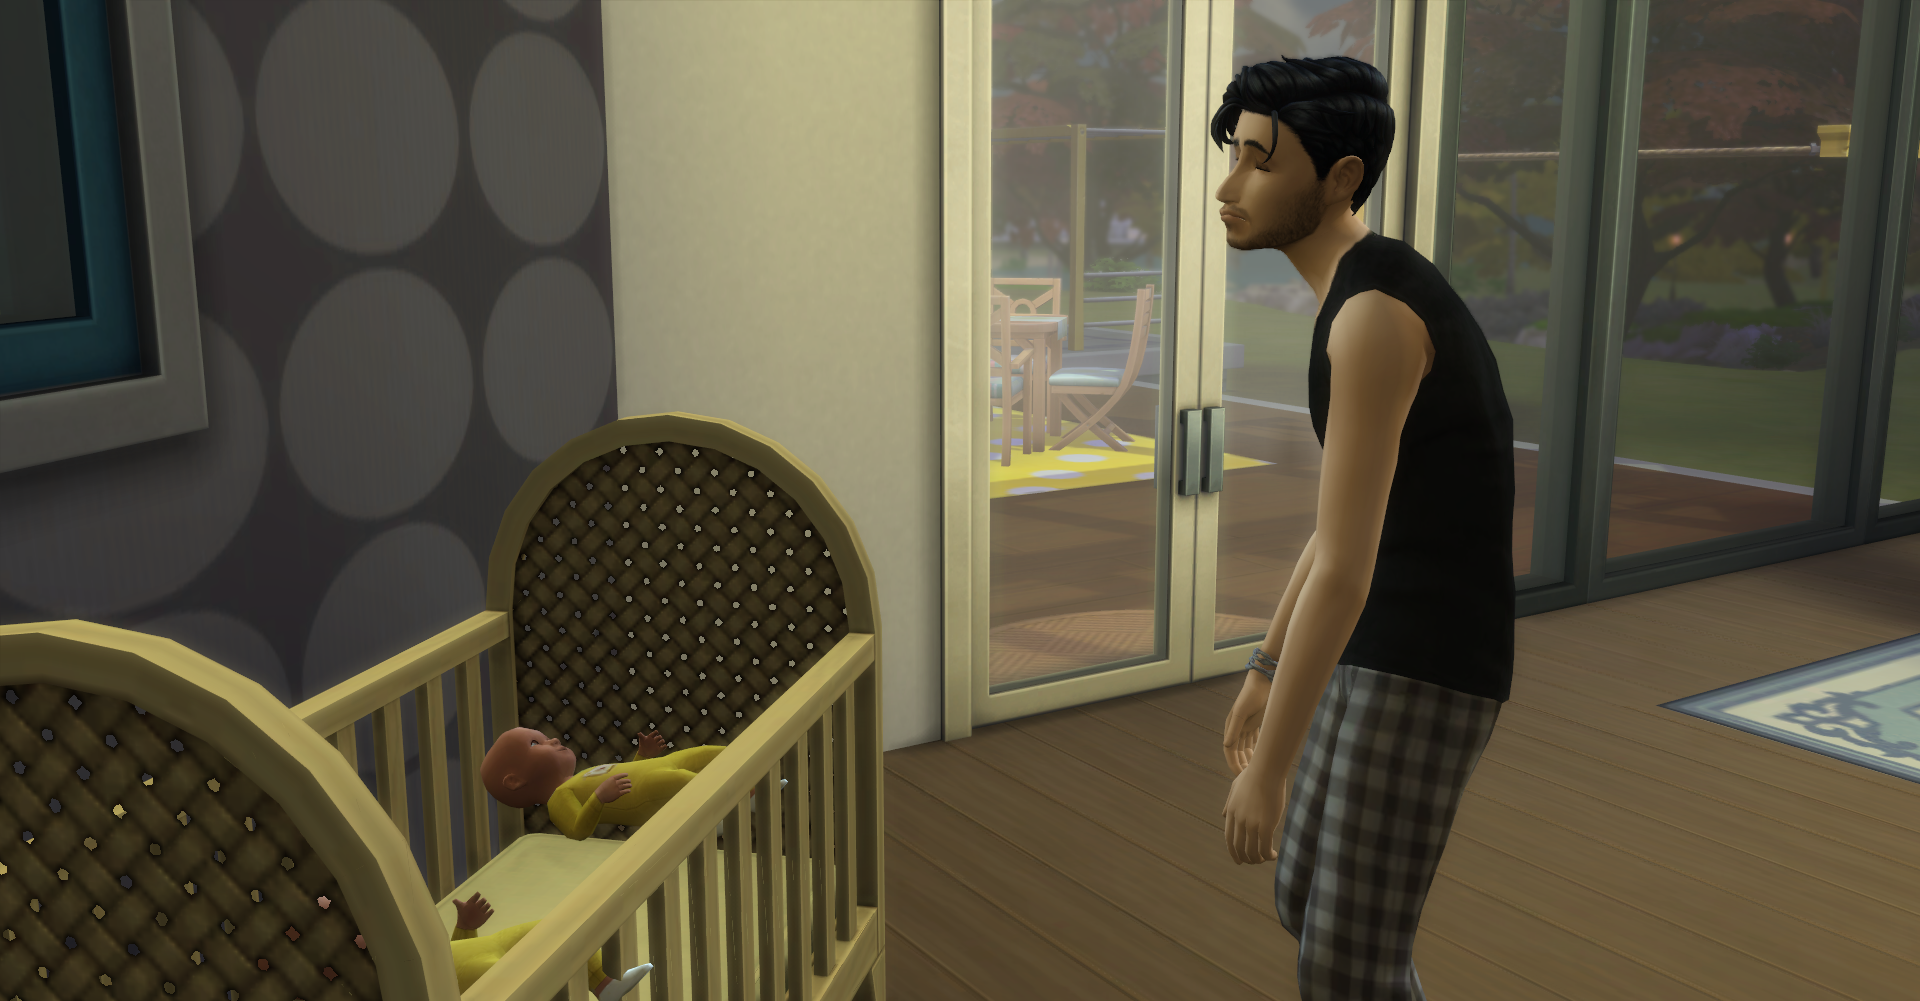 100 baby challenge (masculin) - Page 3 75lb